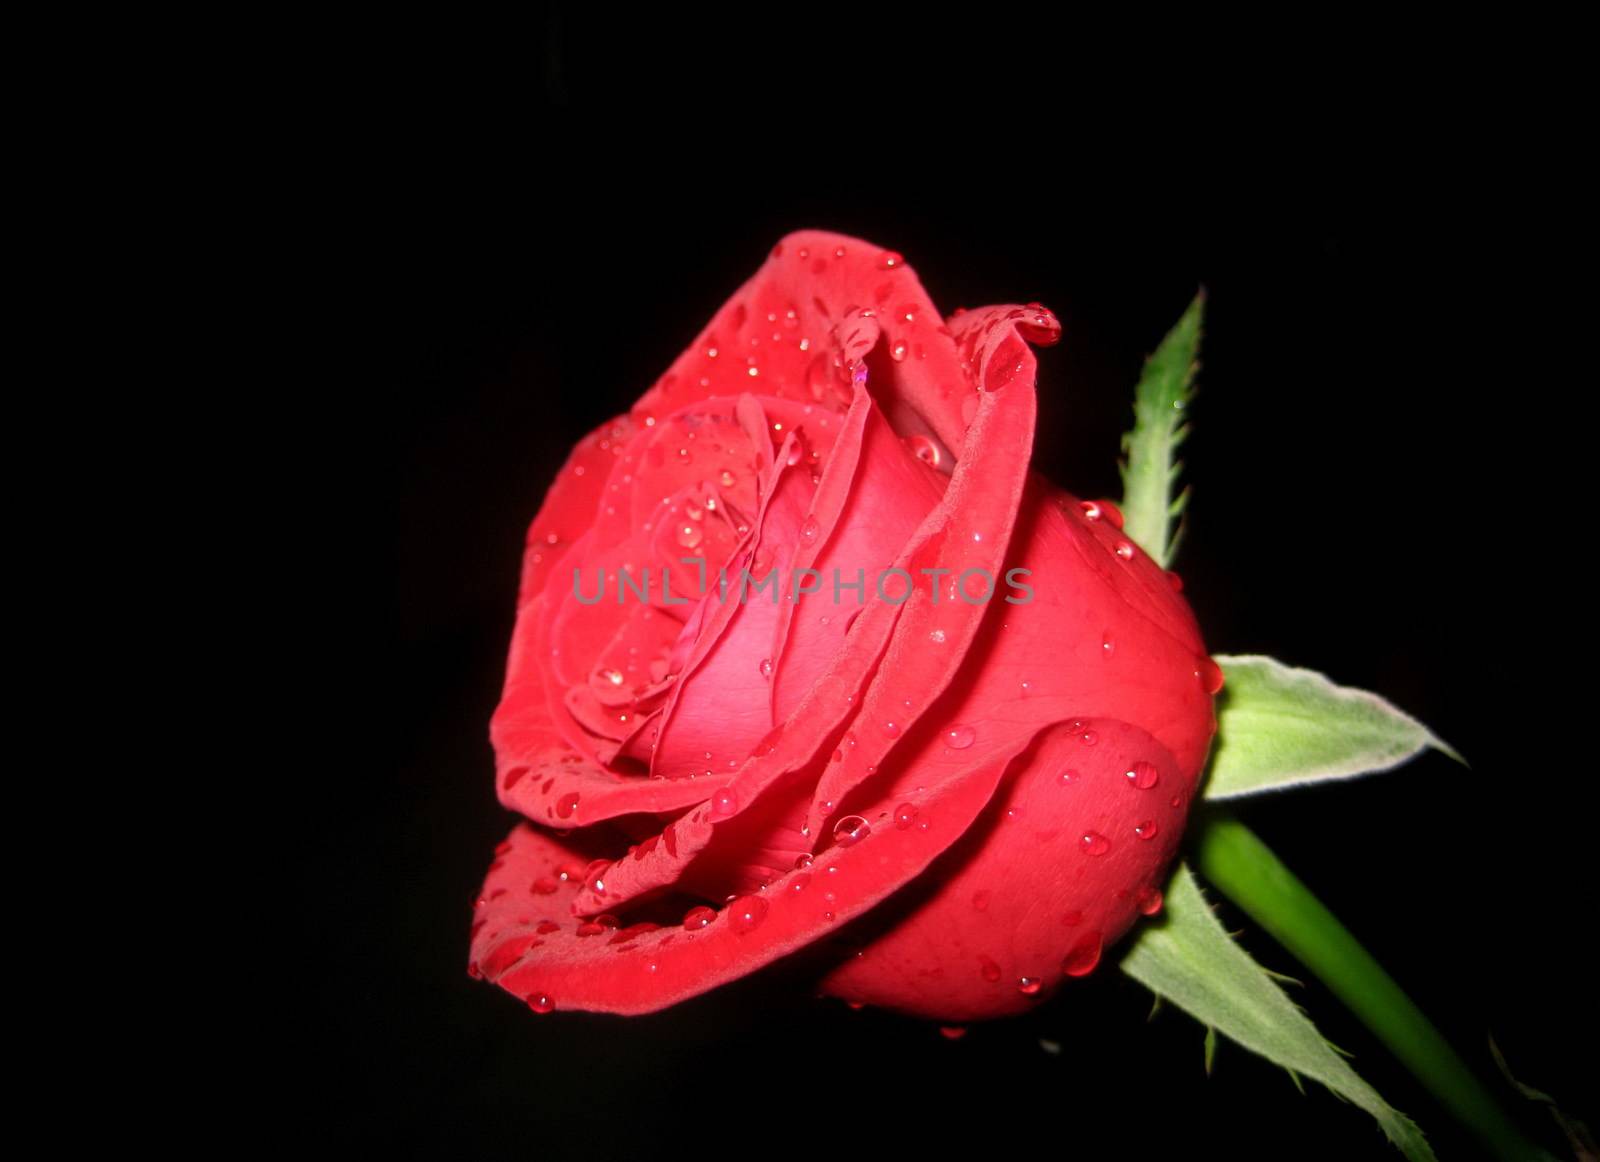 A fresh red rose is in the dark, but can't hide its beauty.